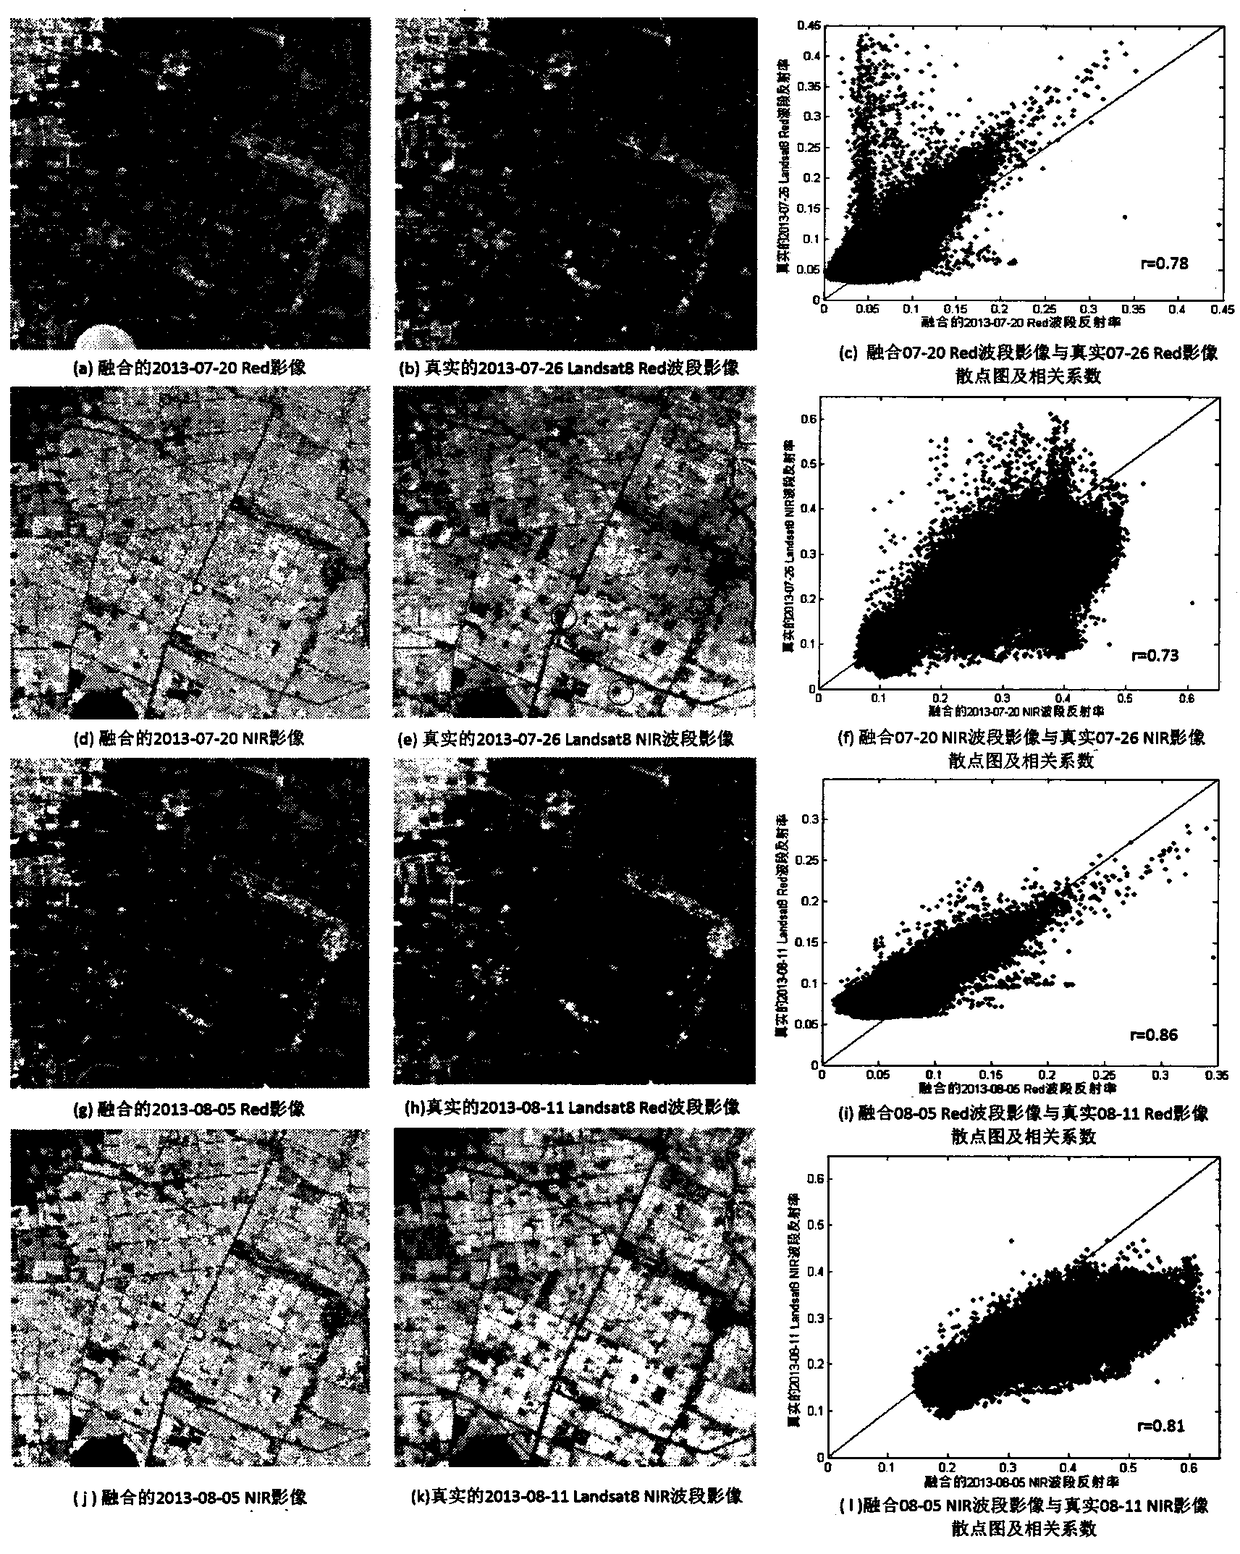 Landsat8 and MODIS fusion to build a method for identifying autumn grain crops with high spatial-temporal resolution data